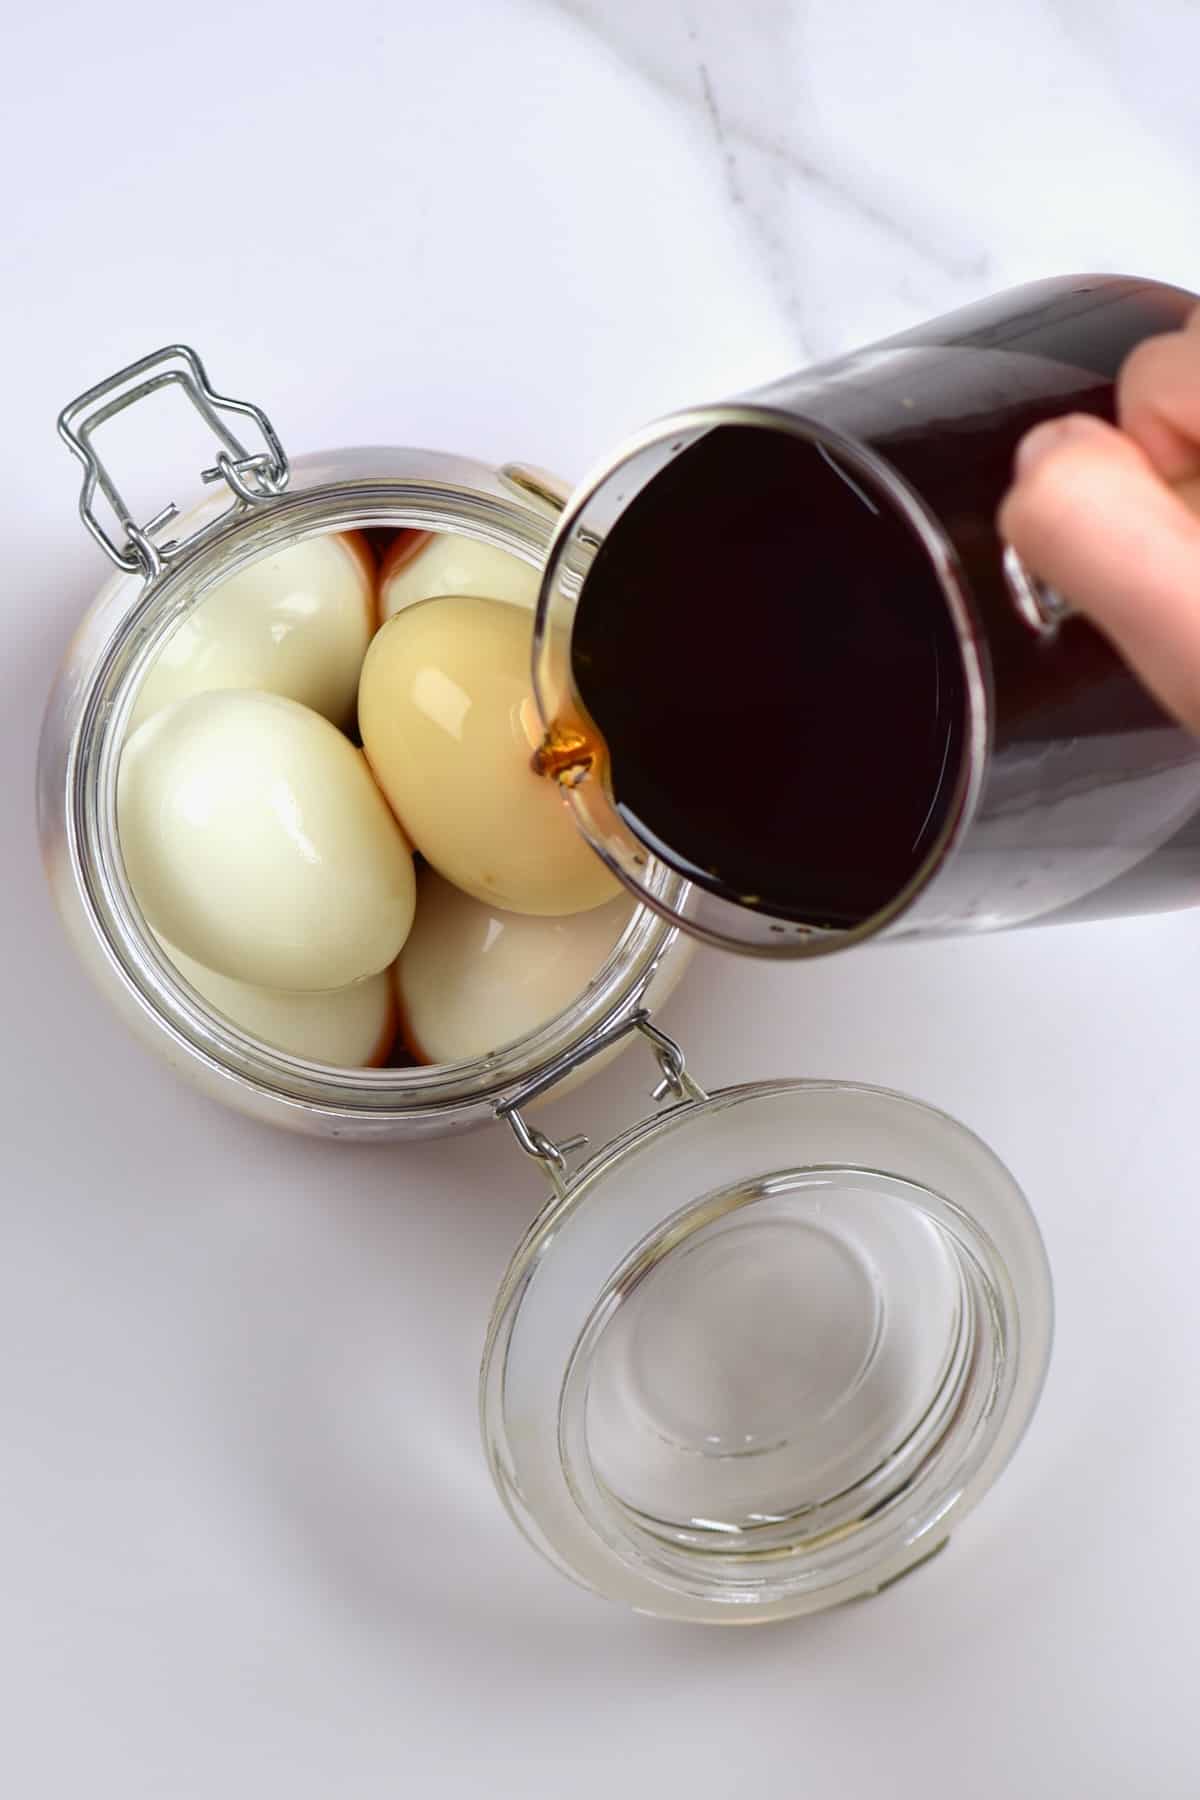 Pouring marinade over boiled eggs